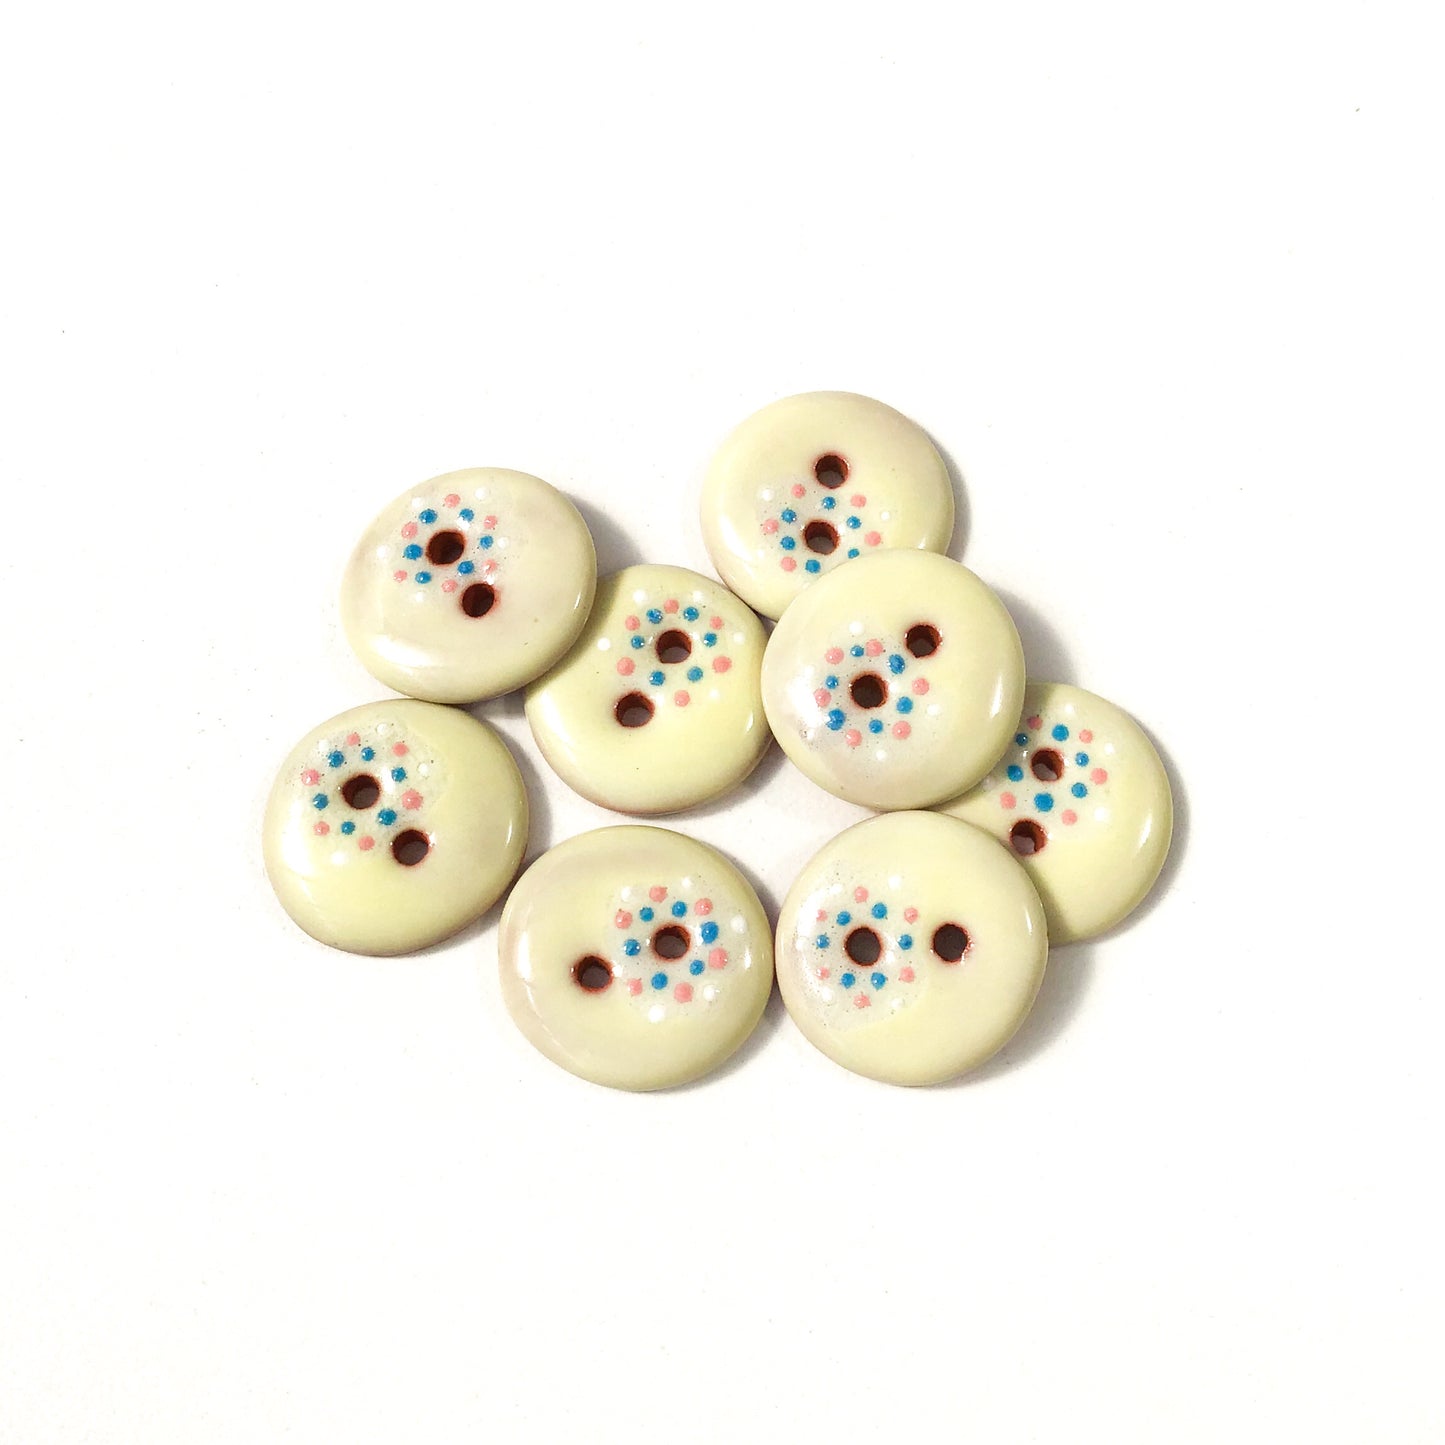 Pastel Yellow "Spark" Ceramic Buttons - Yellow/Pink/Blue Clay Buttons - 5/8" - 8 Pack